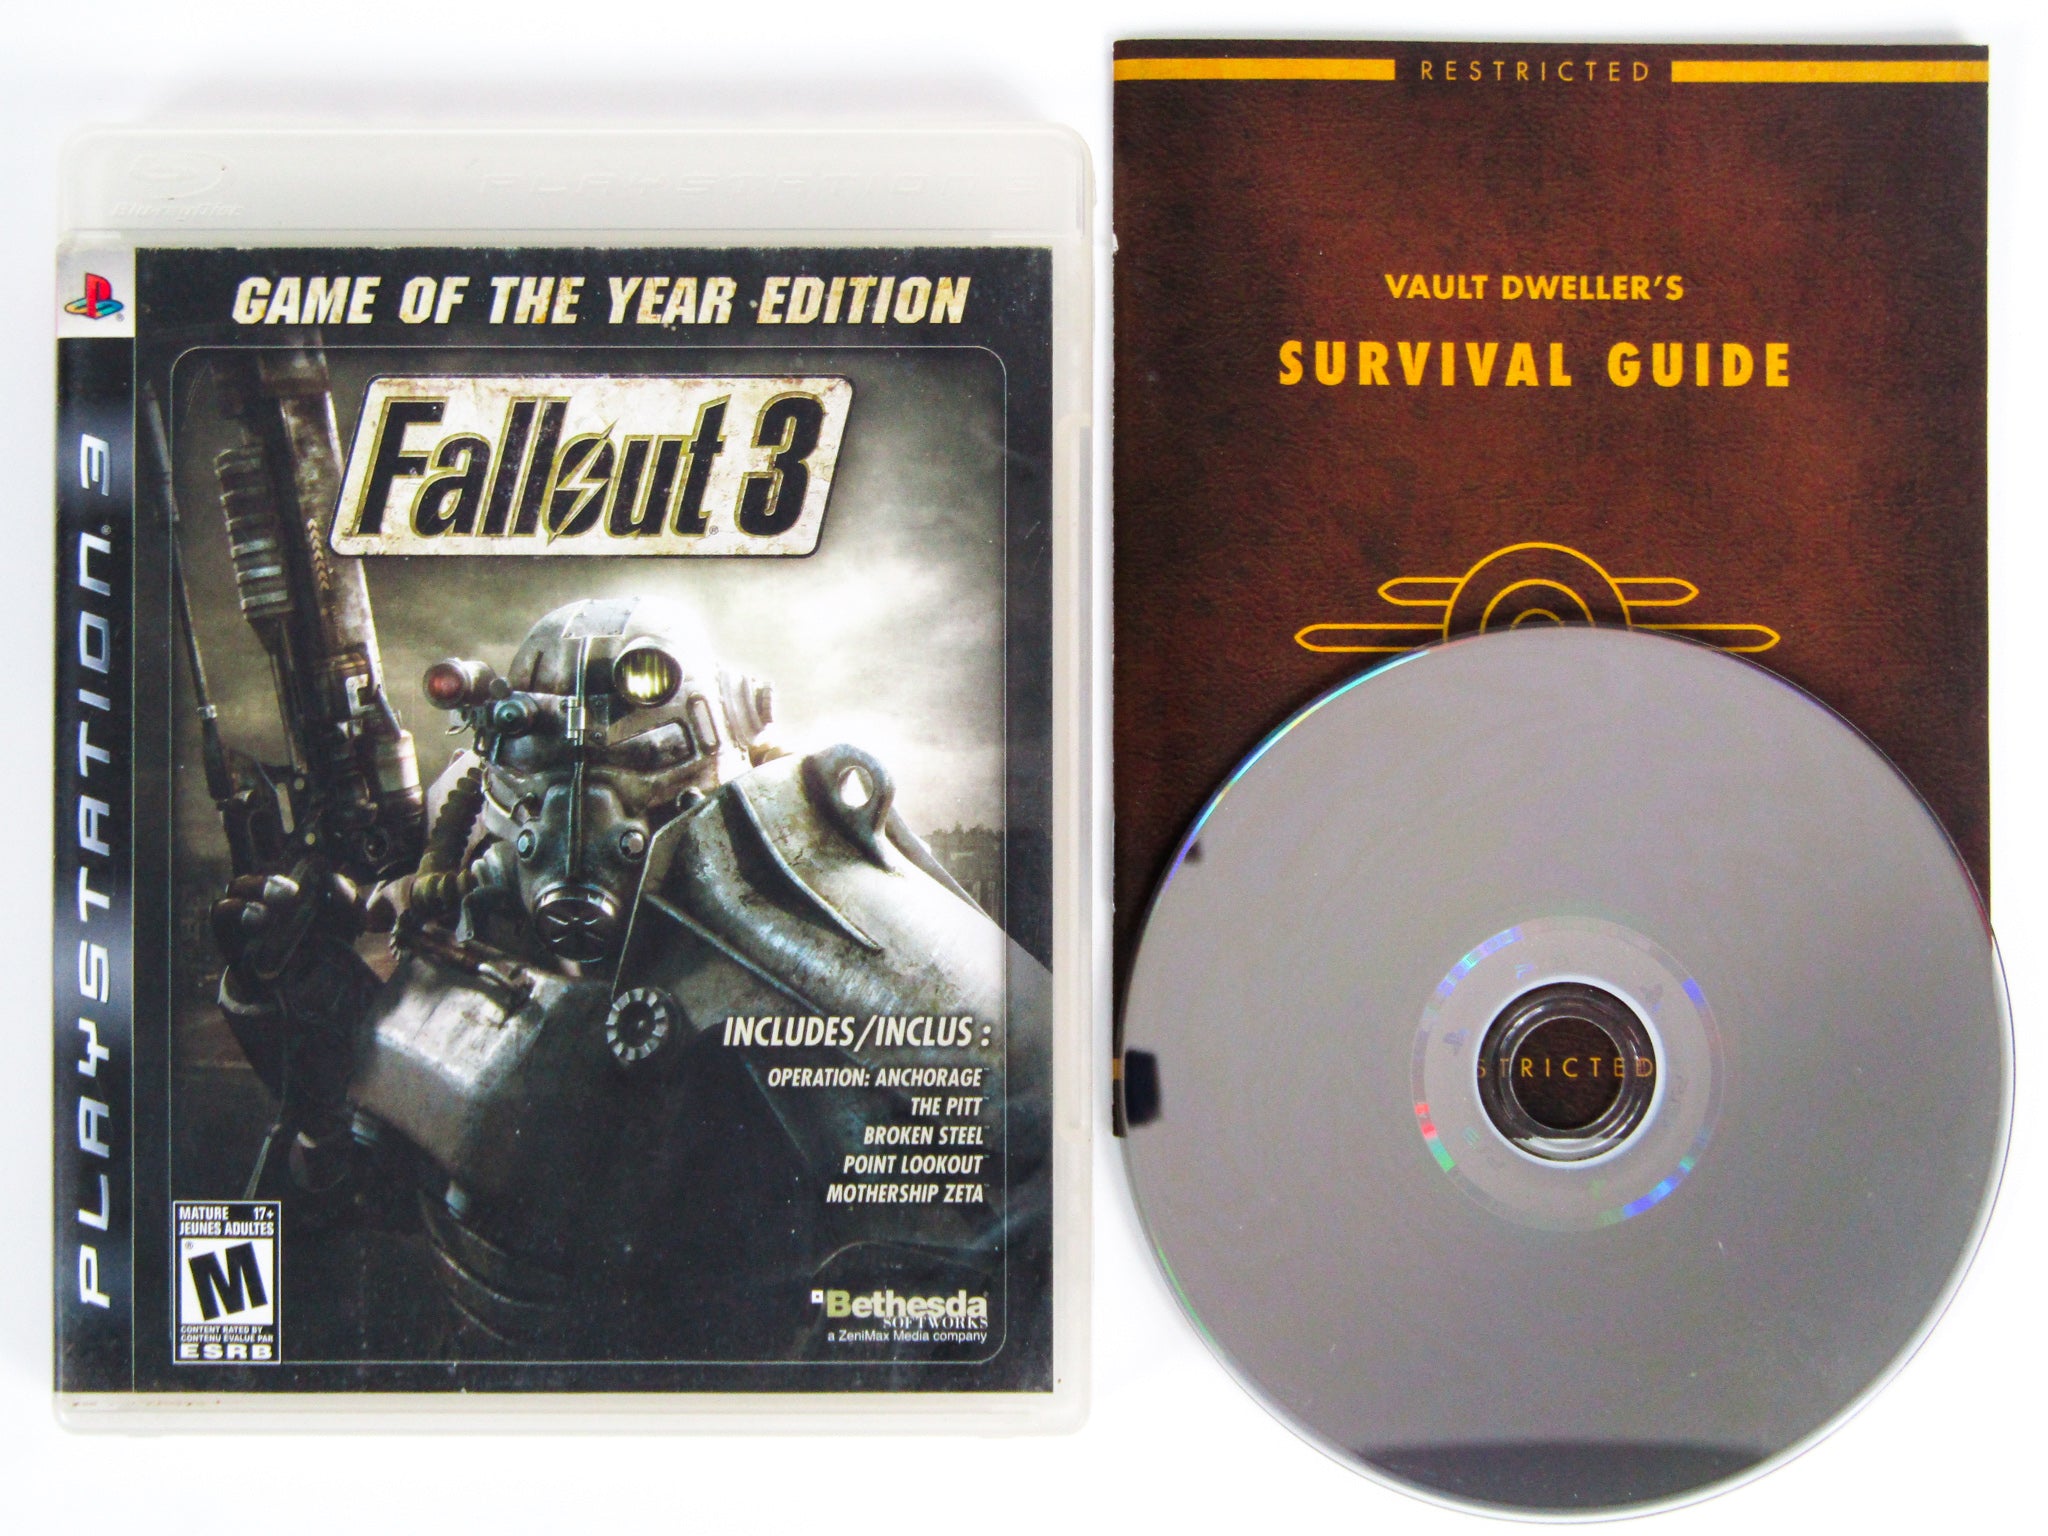  Fallout 3 - PlayStation 3 Game of the Year Edition